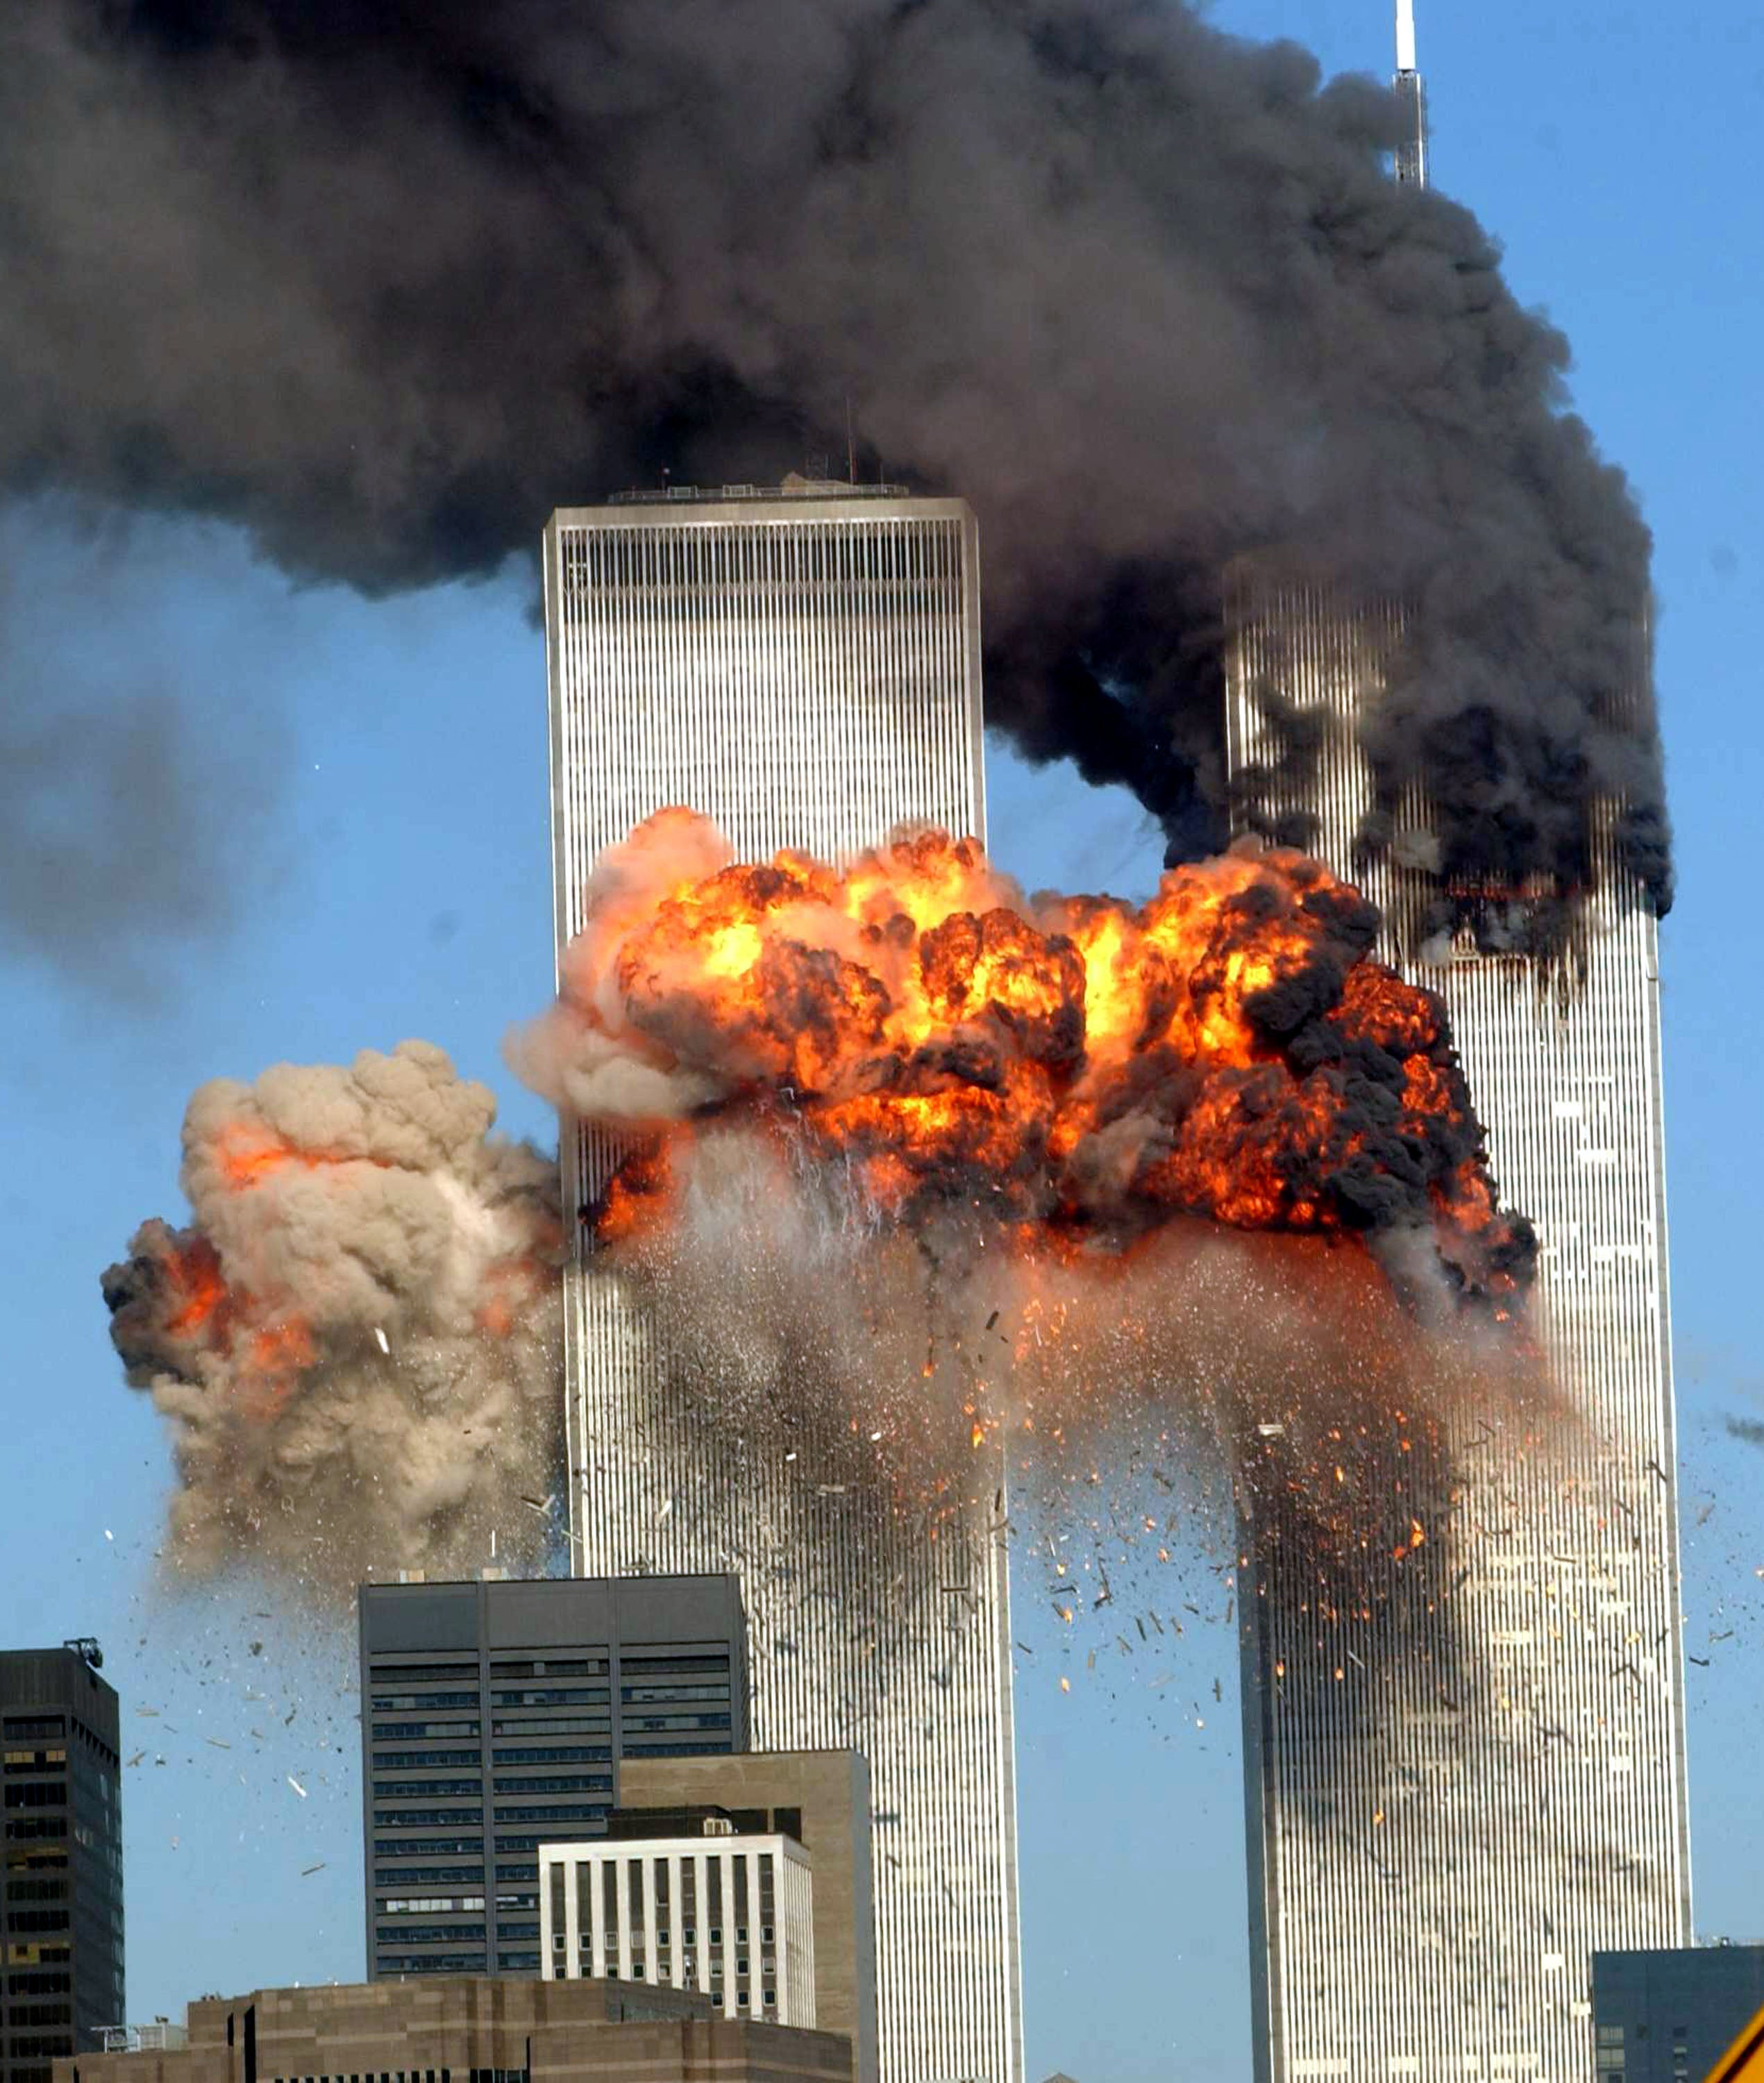 The South Tower is hit, becoming engulfed in flames